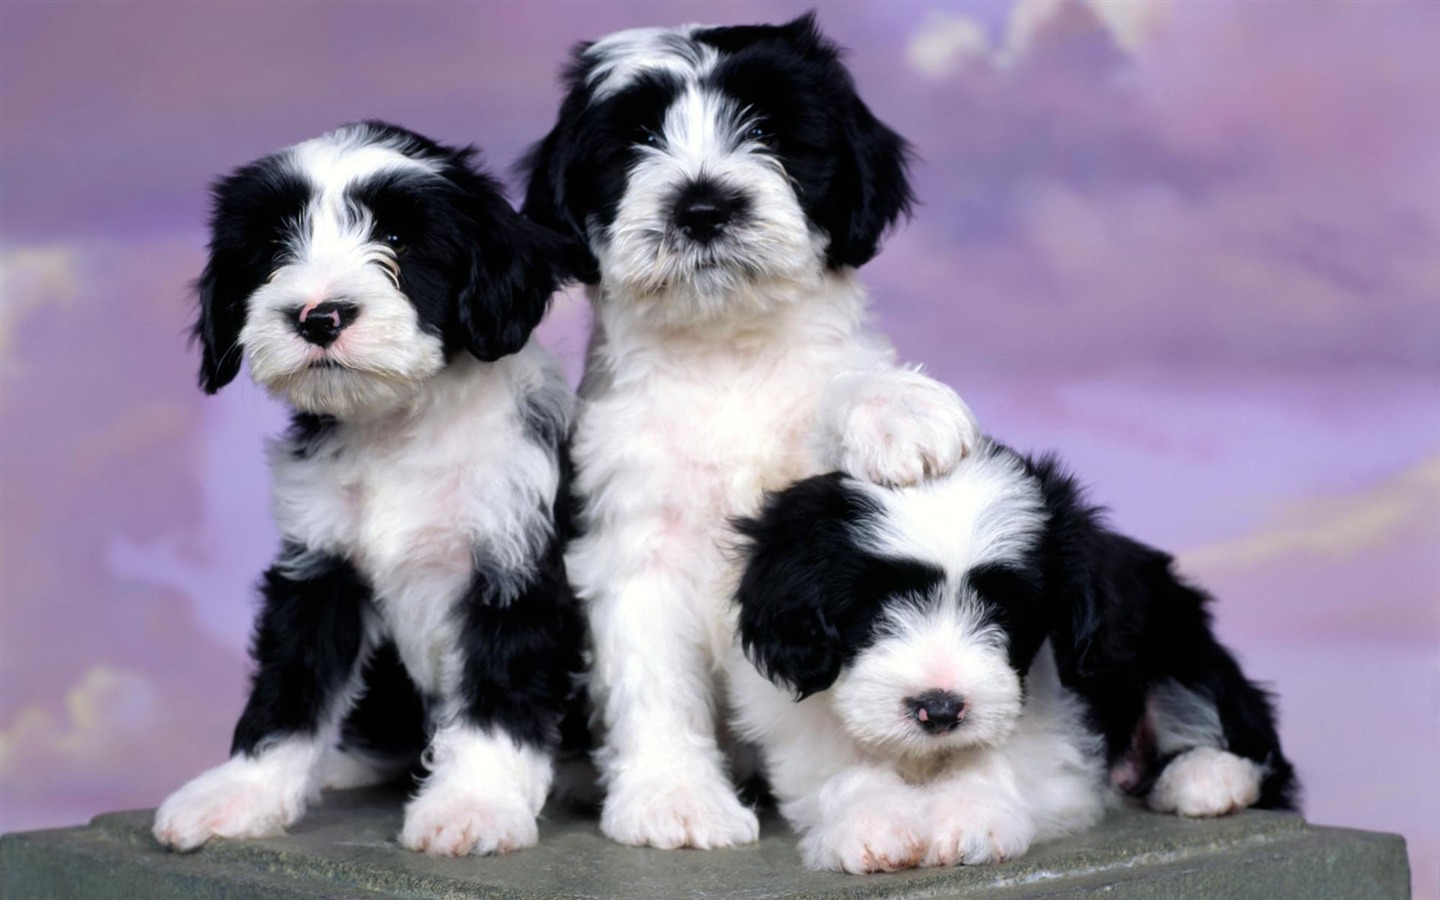 Puppy Photo HD wallpapers (1) #19 - 1440x900